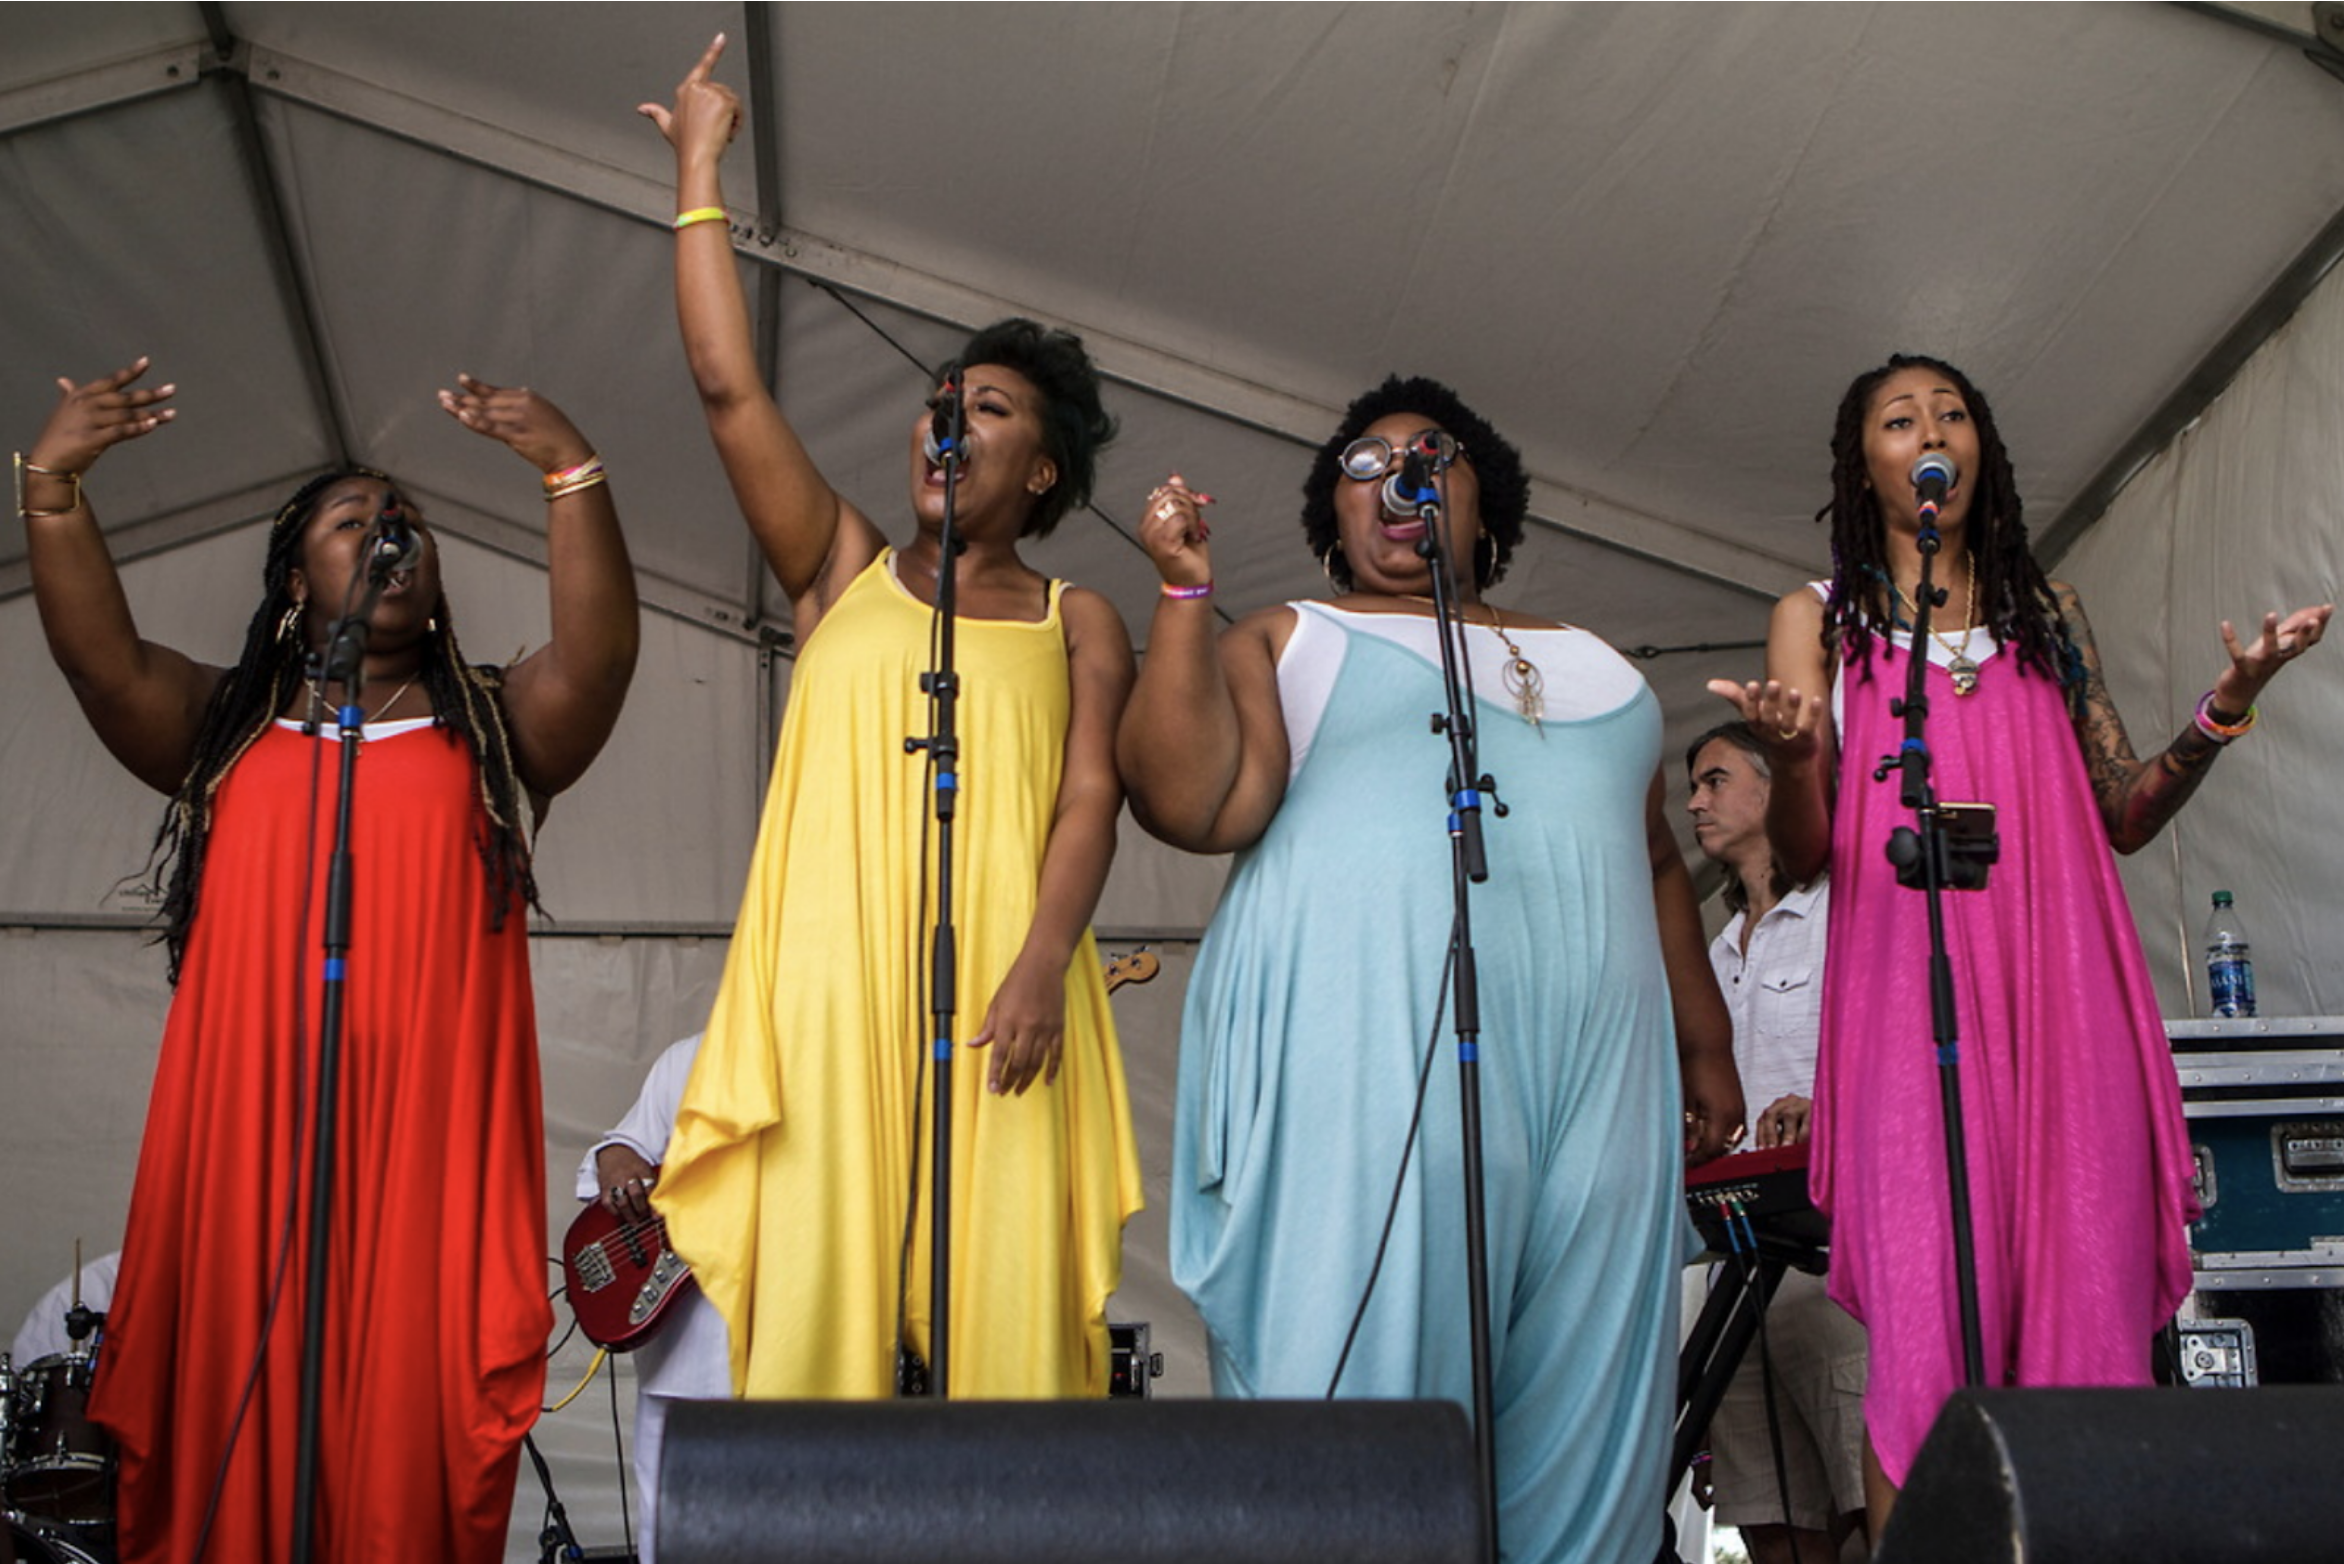 Four black women in colorful dresses singing live on stage